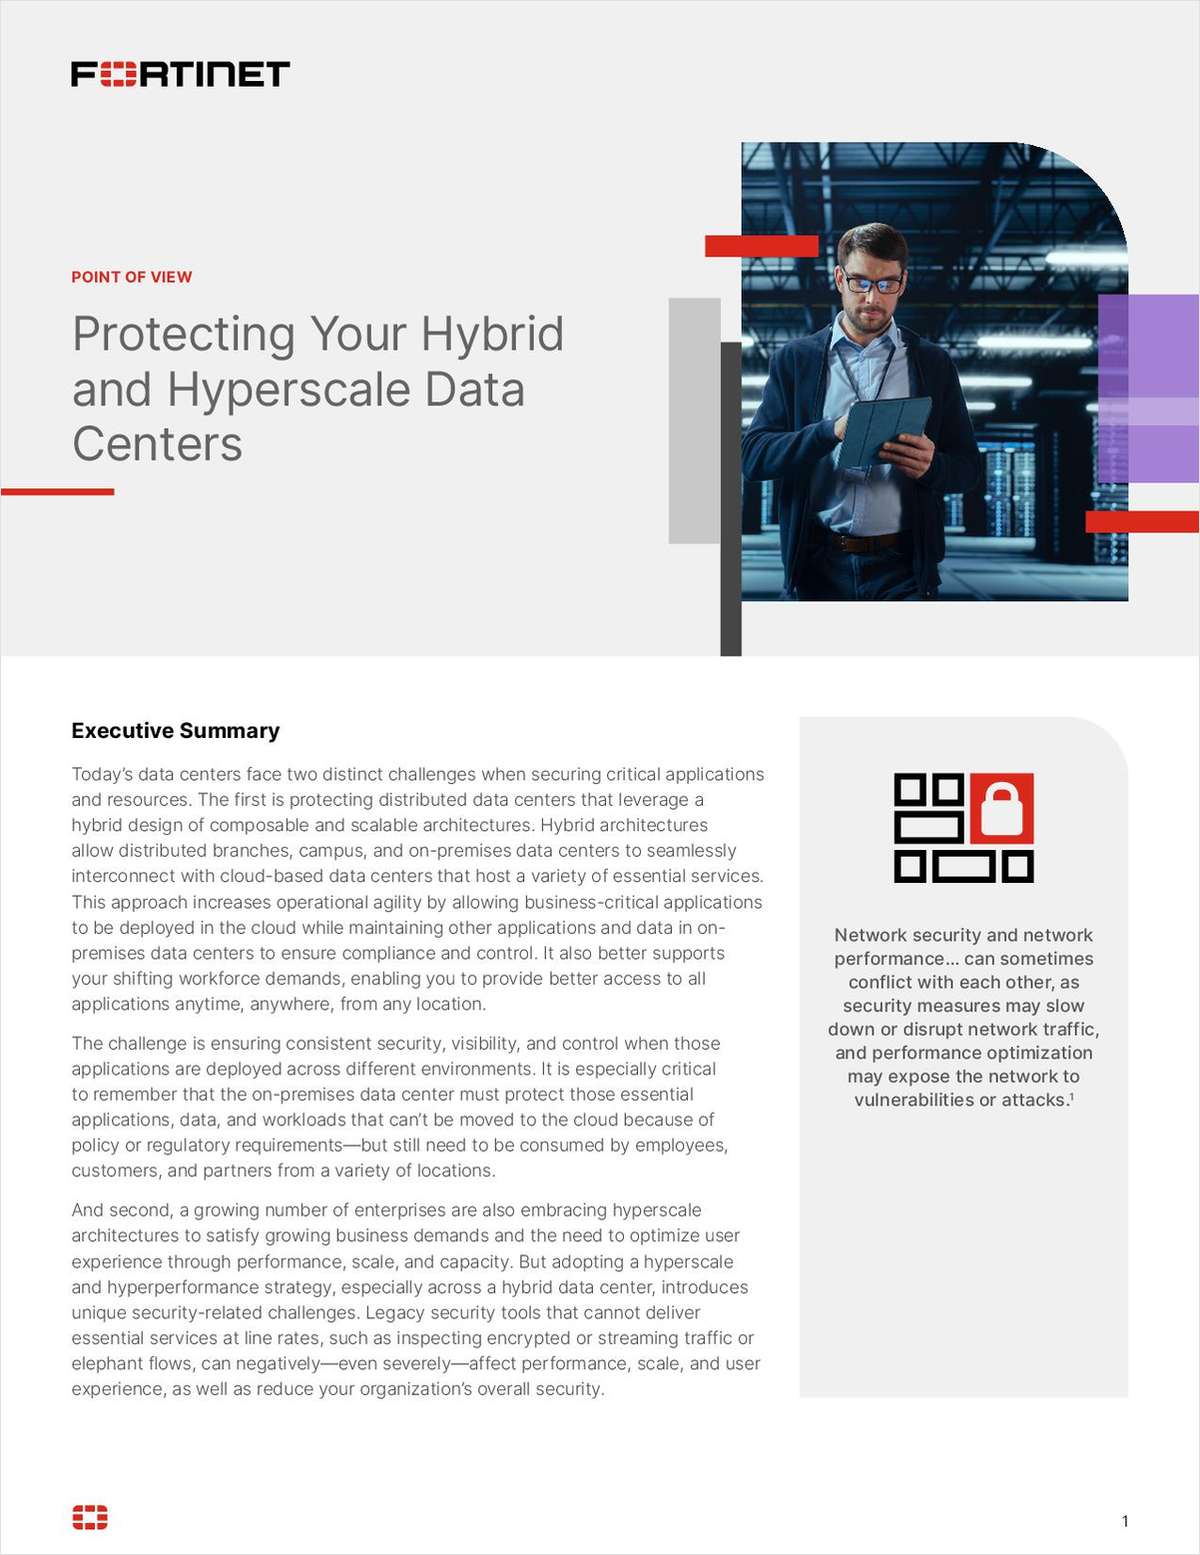 Protecting Your Hybrid and Hyperscale Data Centers